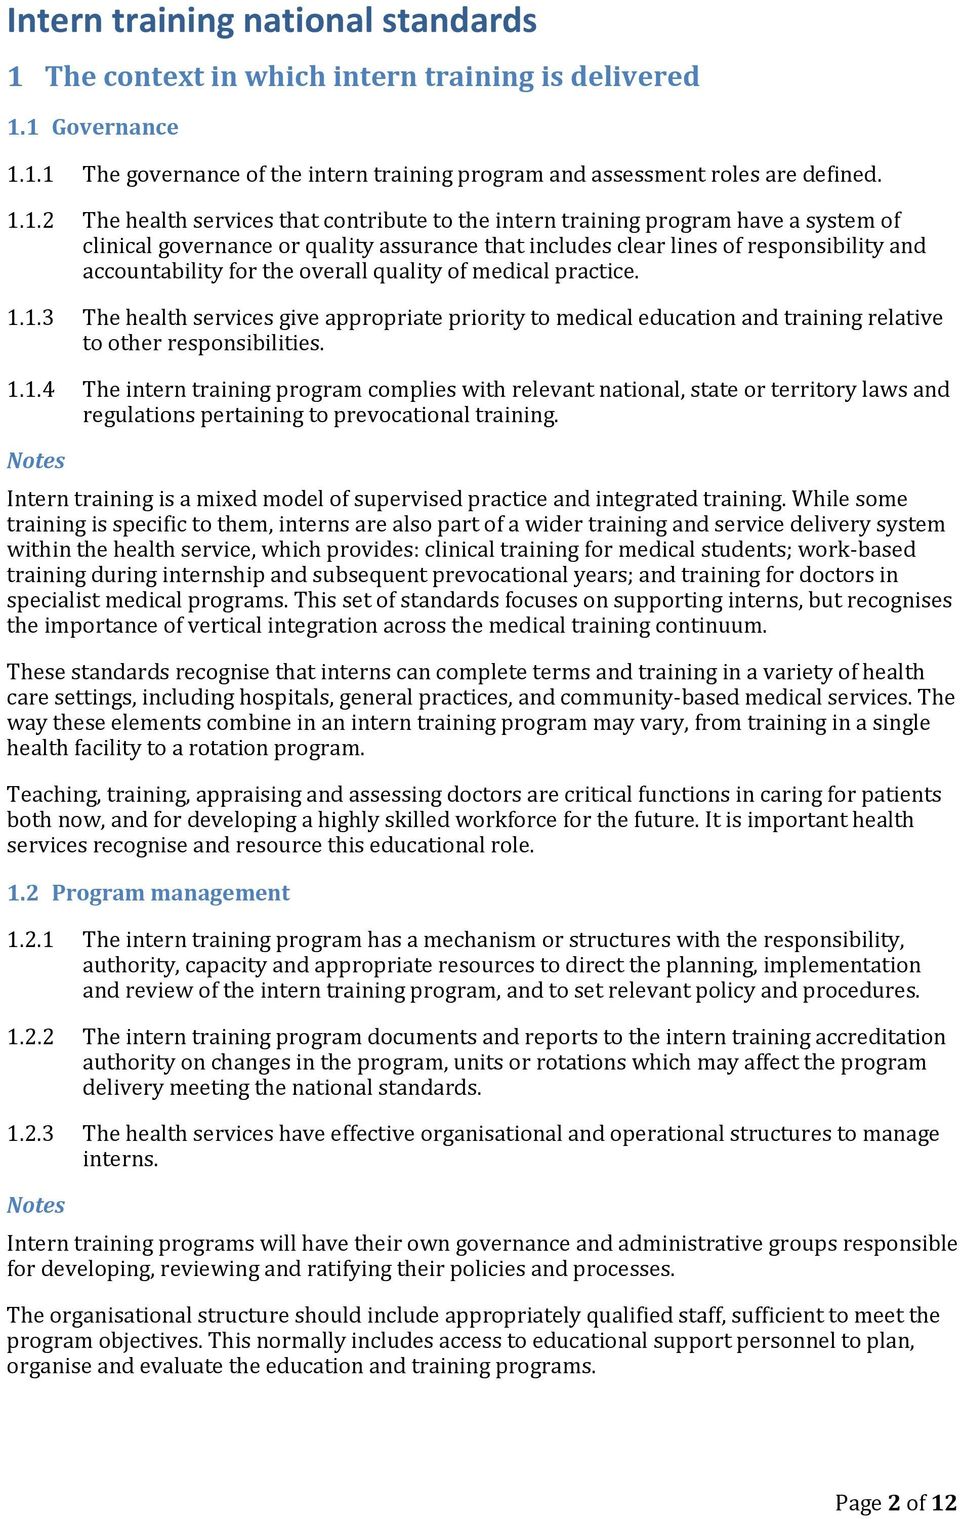 1 Governance 1.1.1 The governance of the intern training program and assessment roles are defined. 1.1.2 The health services that contribute to the intern training program have a system of clinical